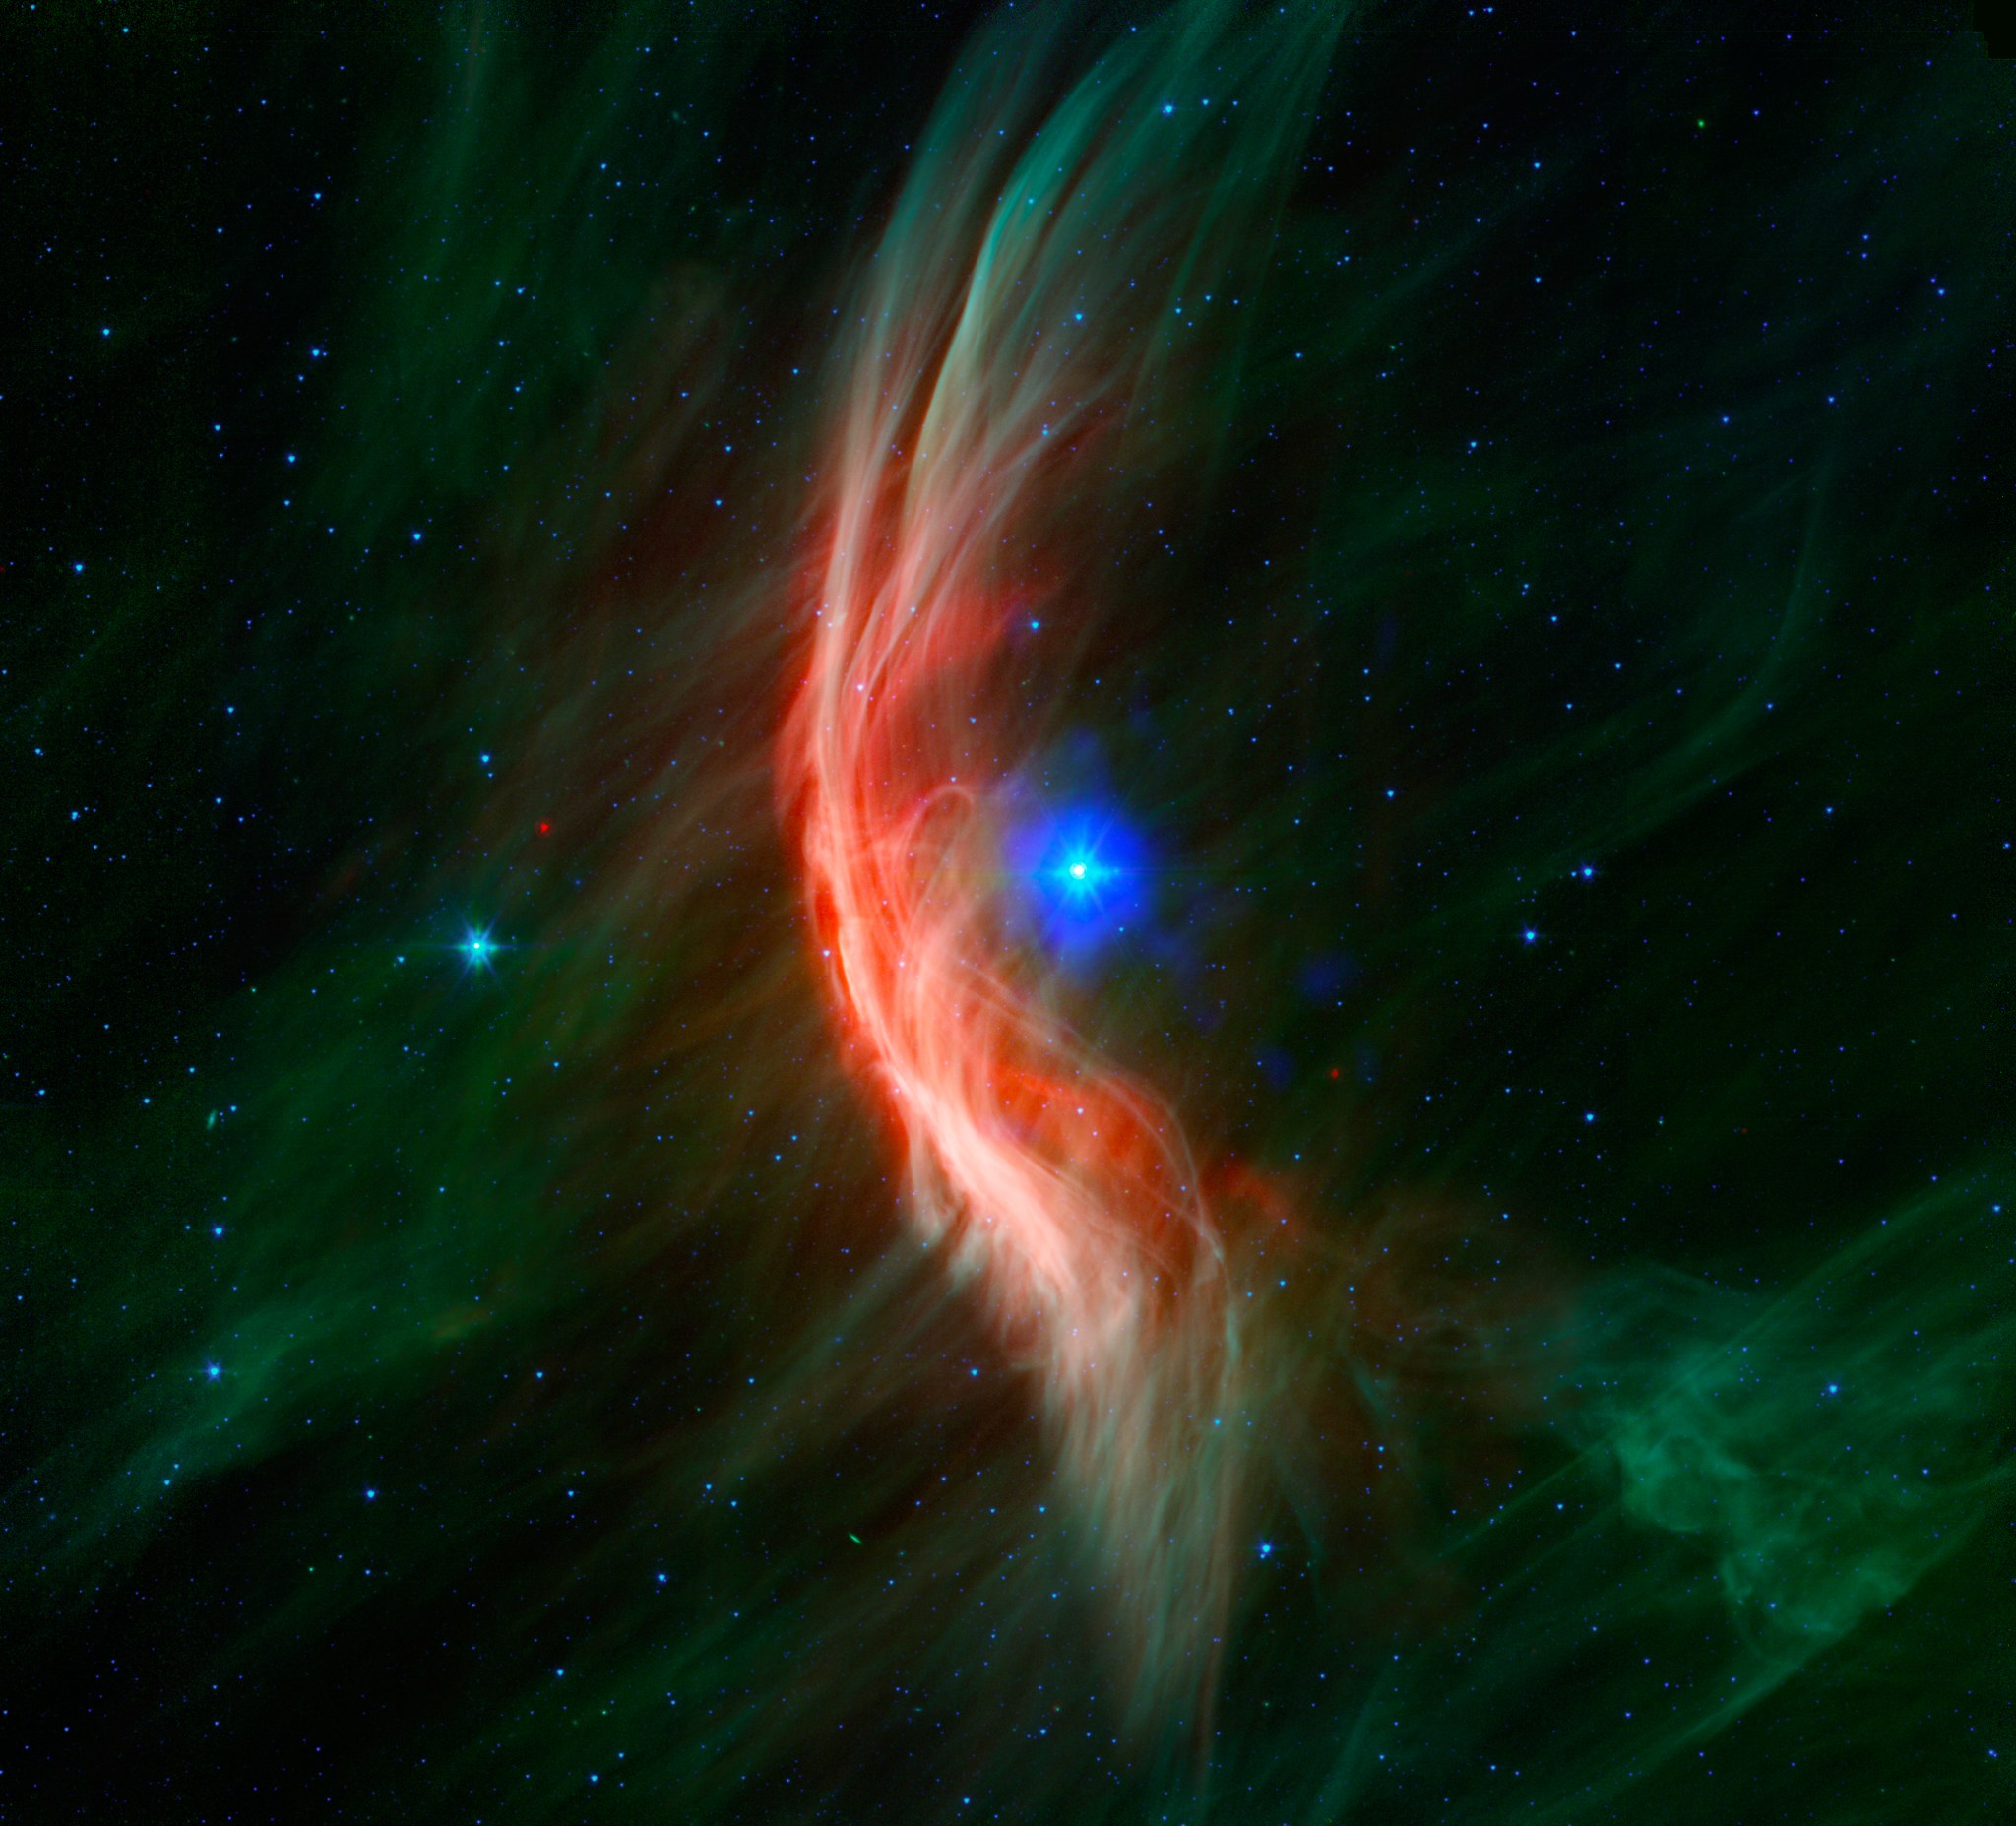 A bright bluish star appears at the center of an arc-shape, red and green gas cloud.